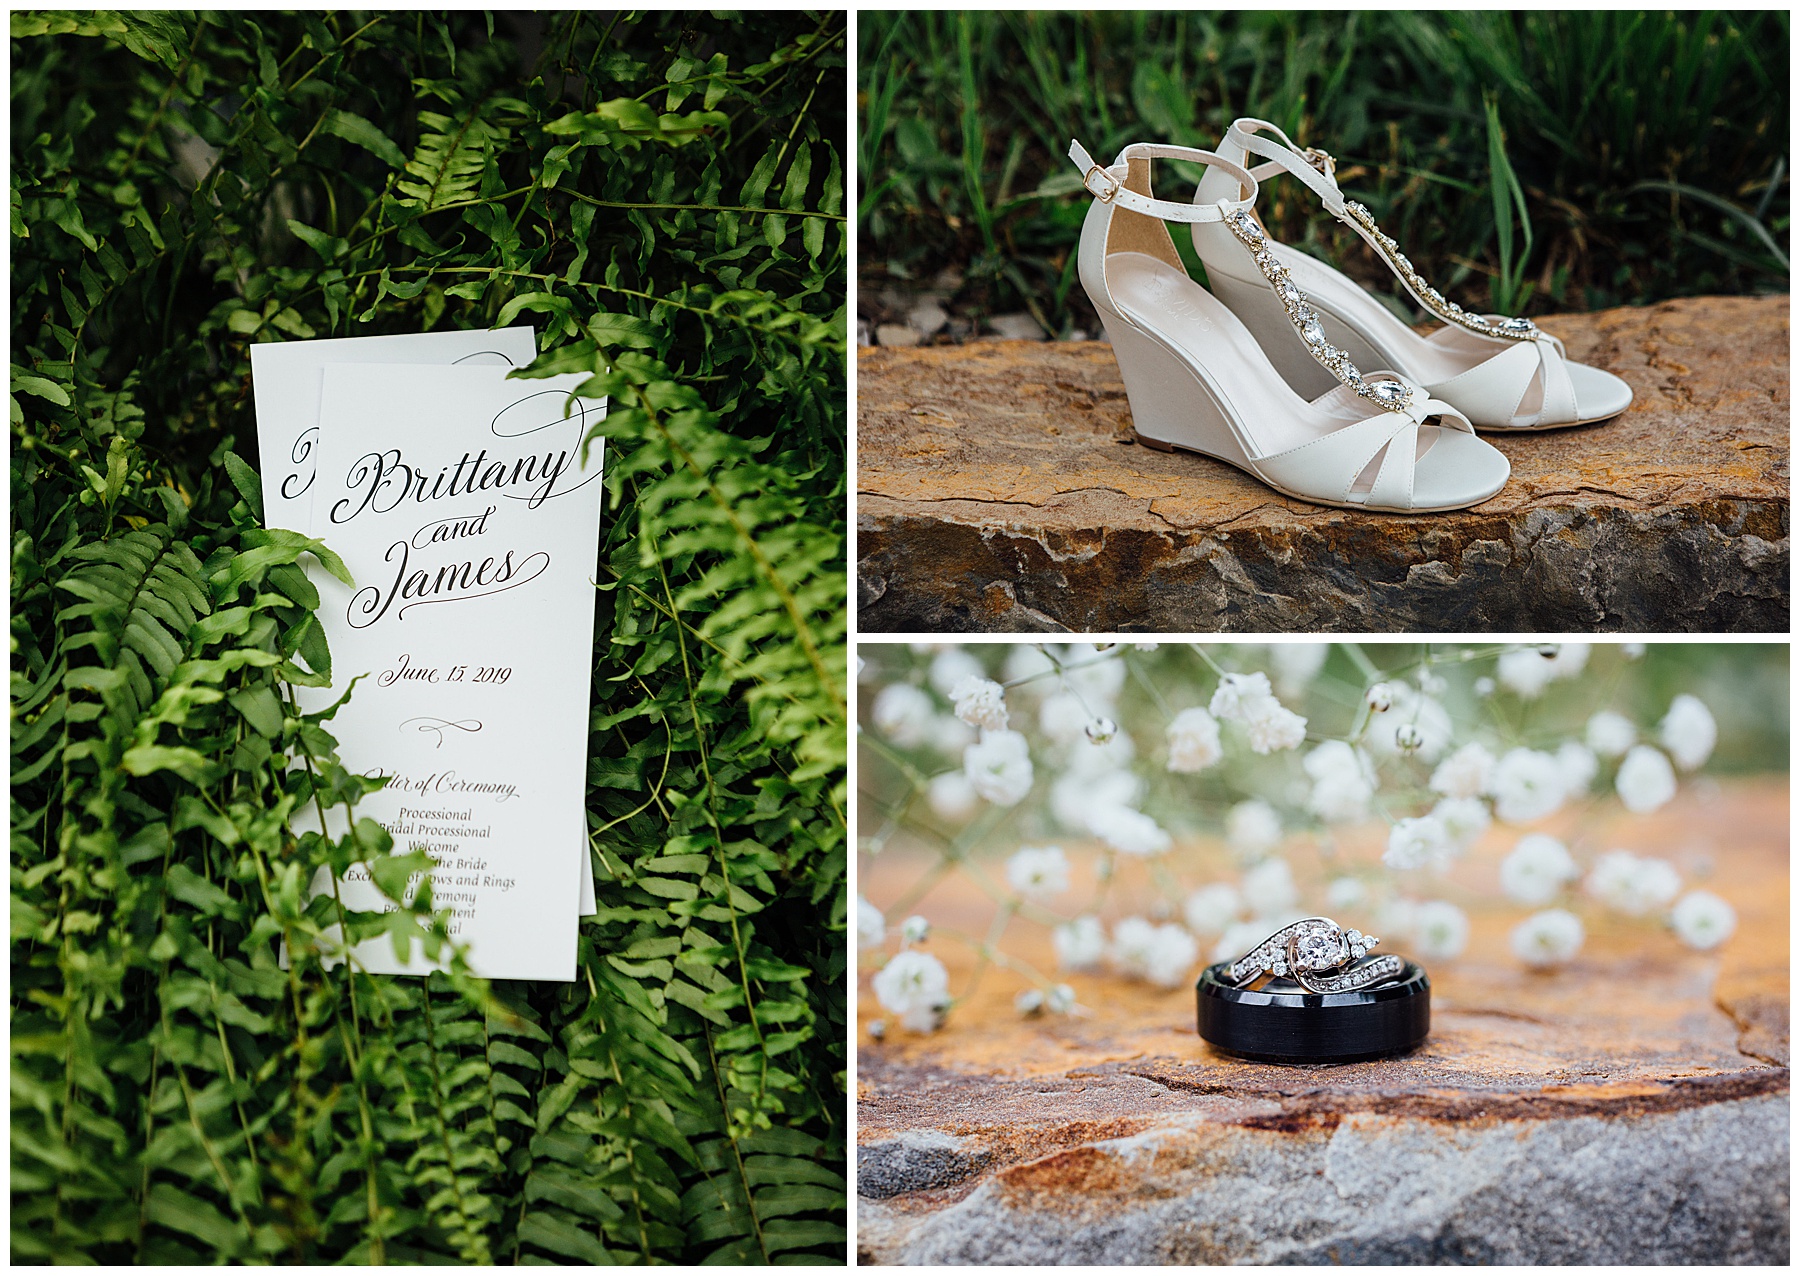 Details of wedding rings and shoes